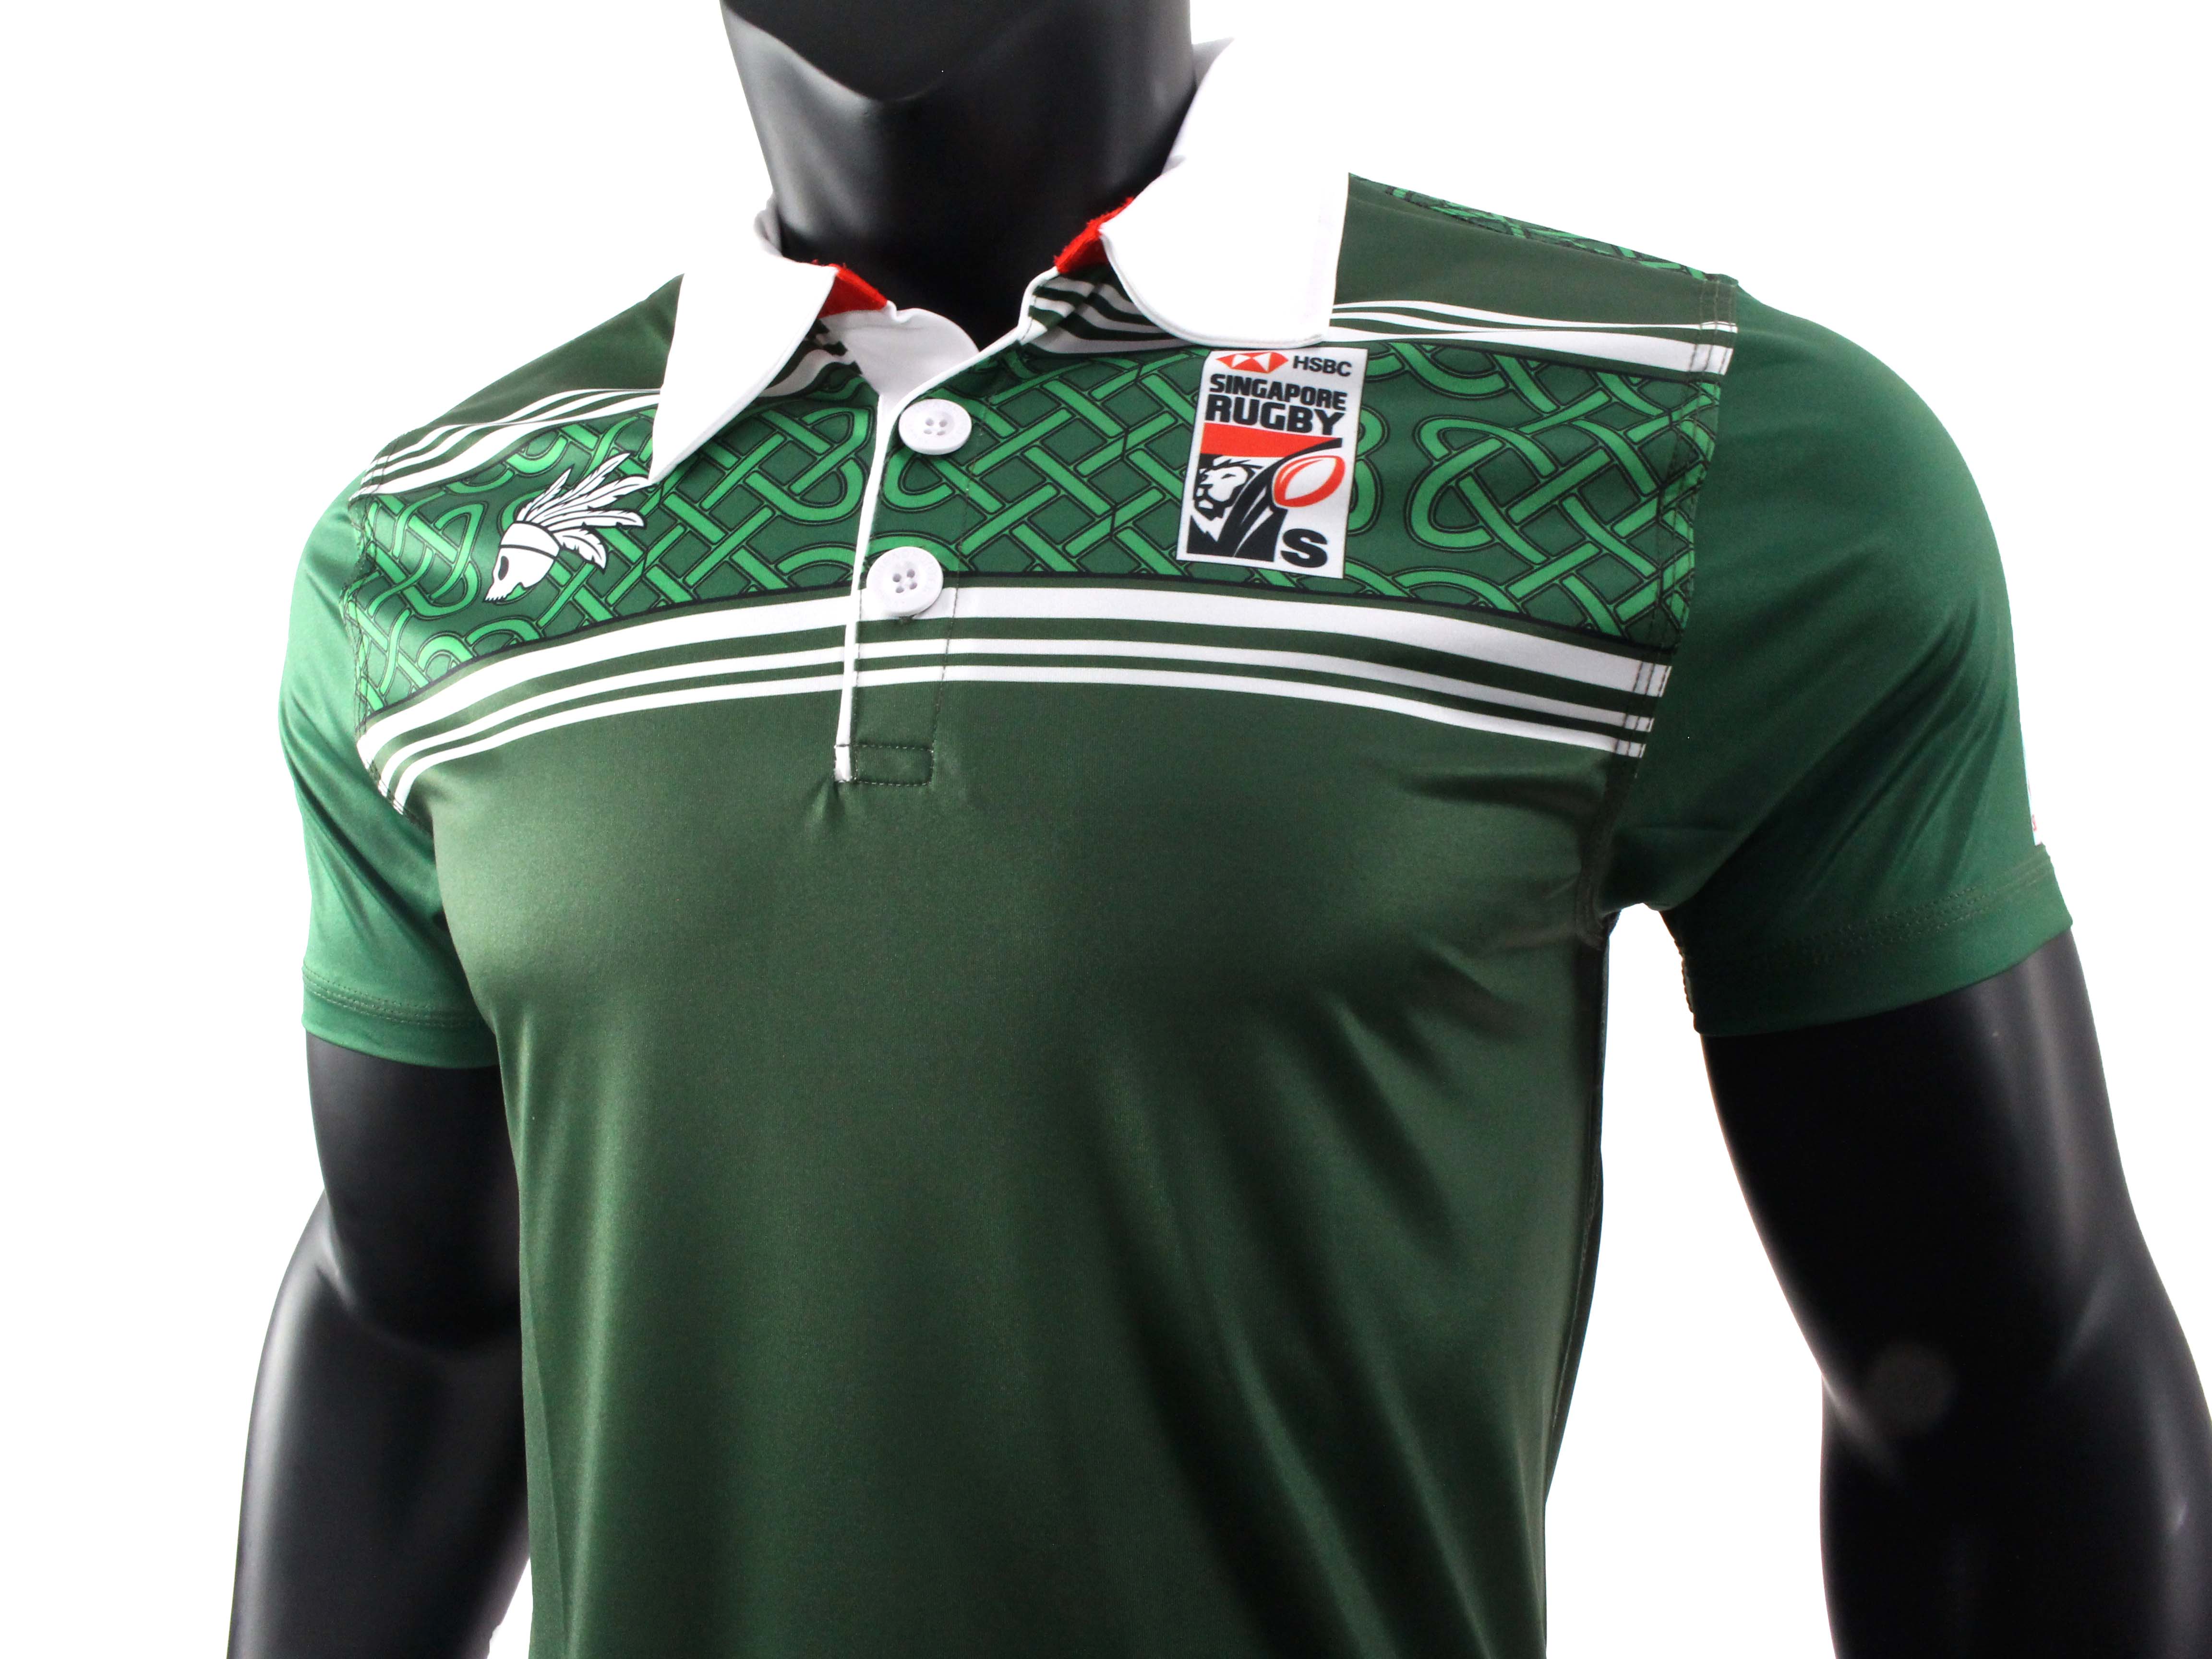 IRELAND RUGBY POLO